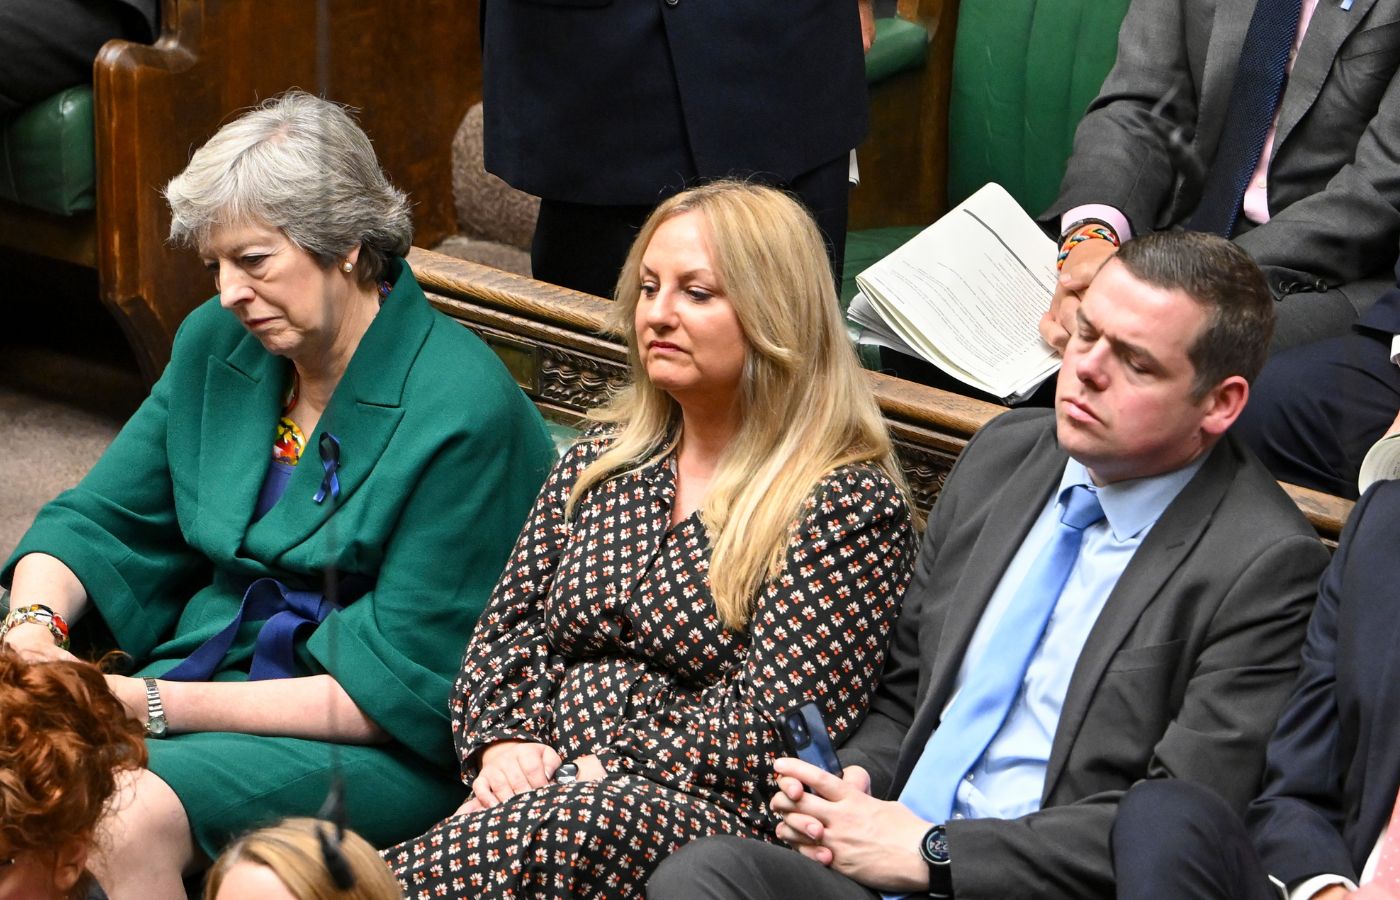 Theresa May, Lisa Cameron and Douglas Ross were seen in the House of Commons together a week after she defected to the Conservatives.